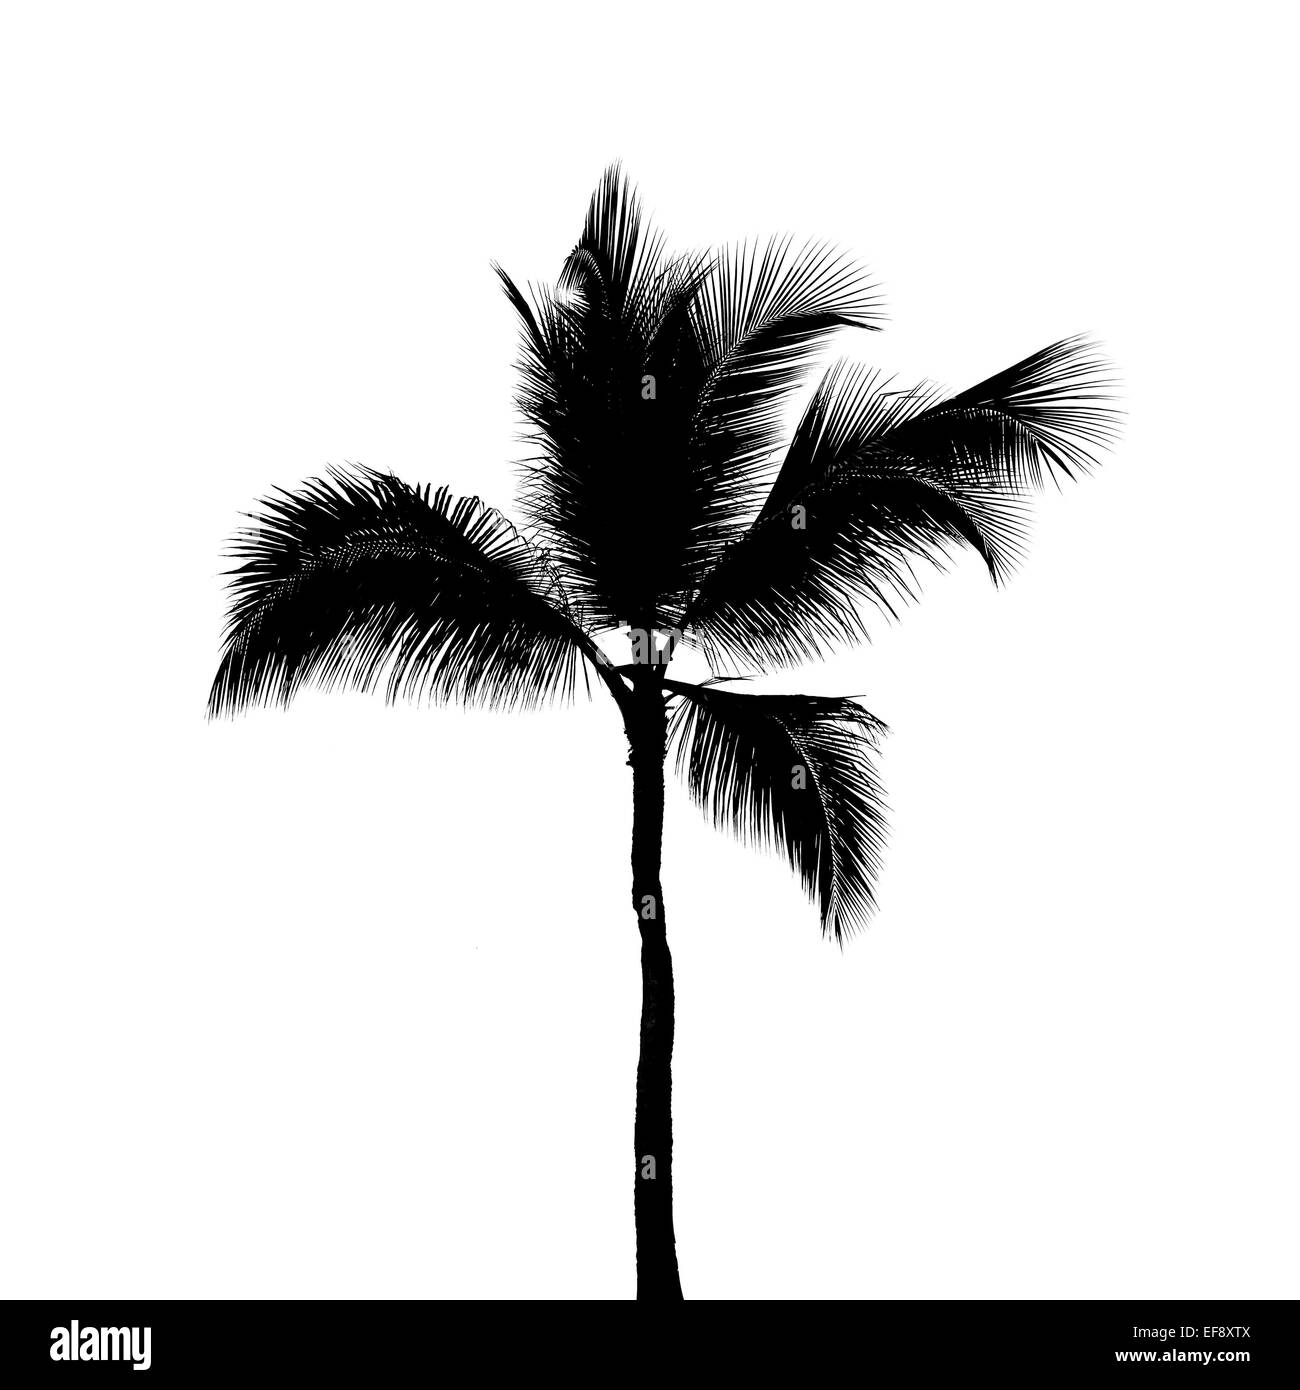 Black silhouette of one coconut palm tree isolated on white background Stock Photo